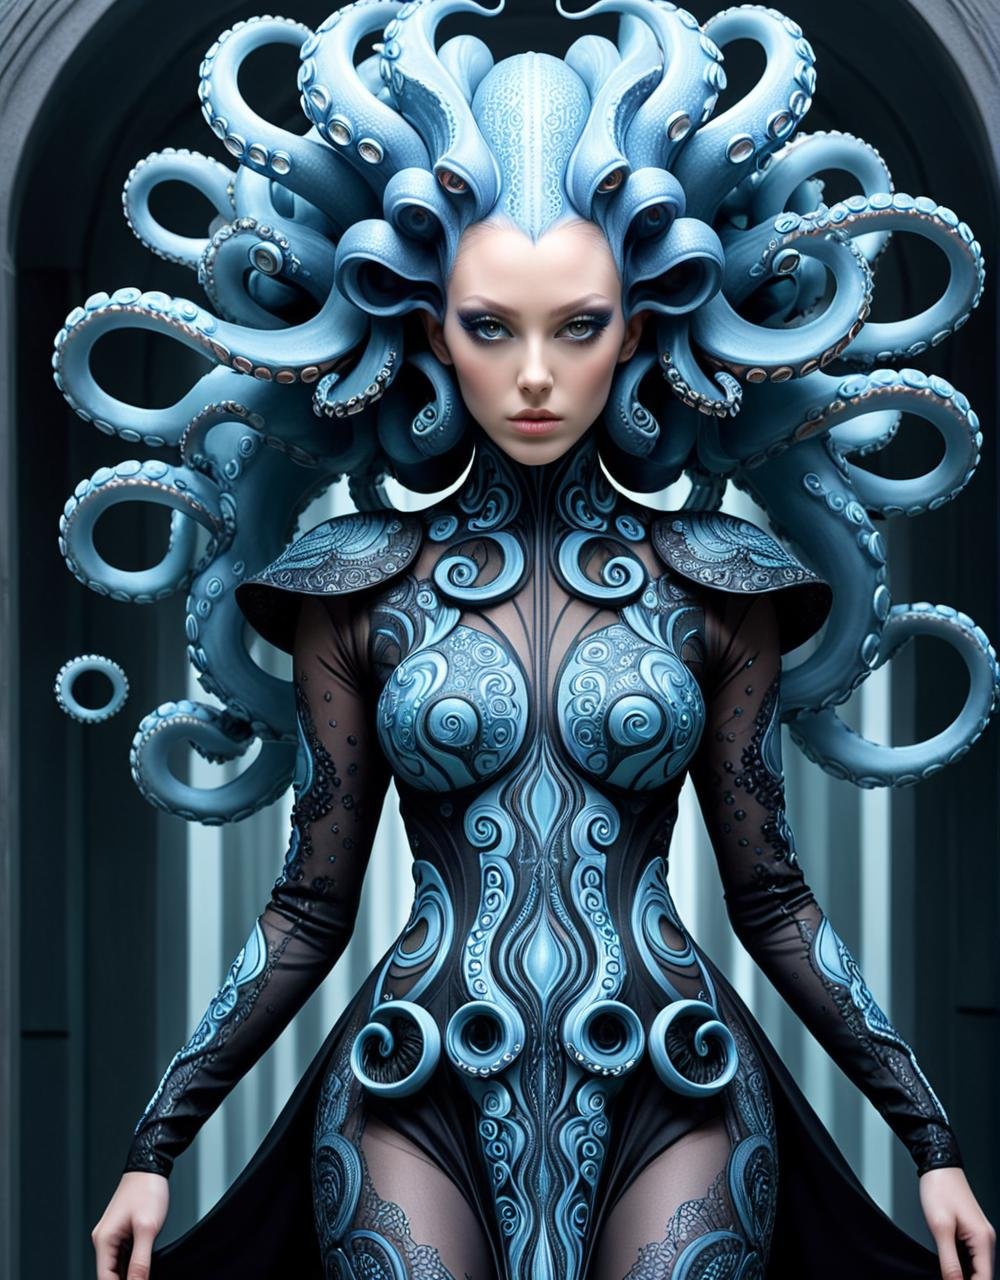 isometric style (Ultrarealistic:1.3) <lora:Tentacle-FFashion-LOha-0416-000009:1> a woman in a cyborg costume with tentacles, beautiful octopus woman, portrait of an octopus goddess, cyberpunk medusa, wrapped in black tentacles, covered with tentacles, octopus goddess, portrait of a sci - fi woman, some tentacles are touching her, fashionable futuristic woman, in style of hr giger, dystopian sci-fi character with a woman in a dress with octopus tentacles, beautiful octopus woman, portrait of an octopus goddess, octopus goddess, iris van herpen rankin, a stunning young ethereal figure, intricate ornate anime cgi style, futuristic and ethereal, inspired by Jean Delville, intricate fractal armor, intricate transhuman, portrait of a cyborg queen, intricate realistic fantasy, cyborg goddess in cosmos . vibrant, beautiful, crisp, detailed, ultra detailed, intricate